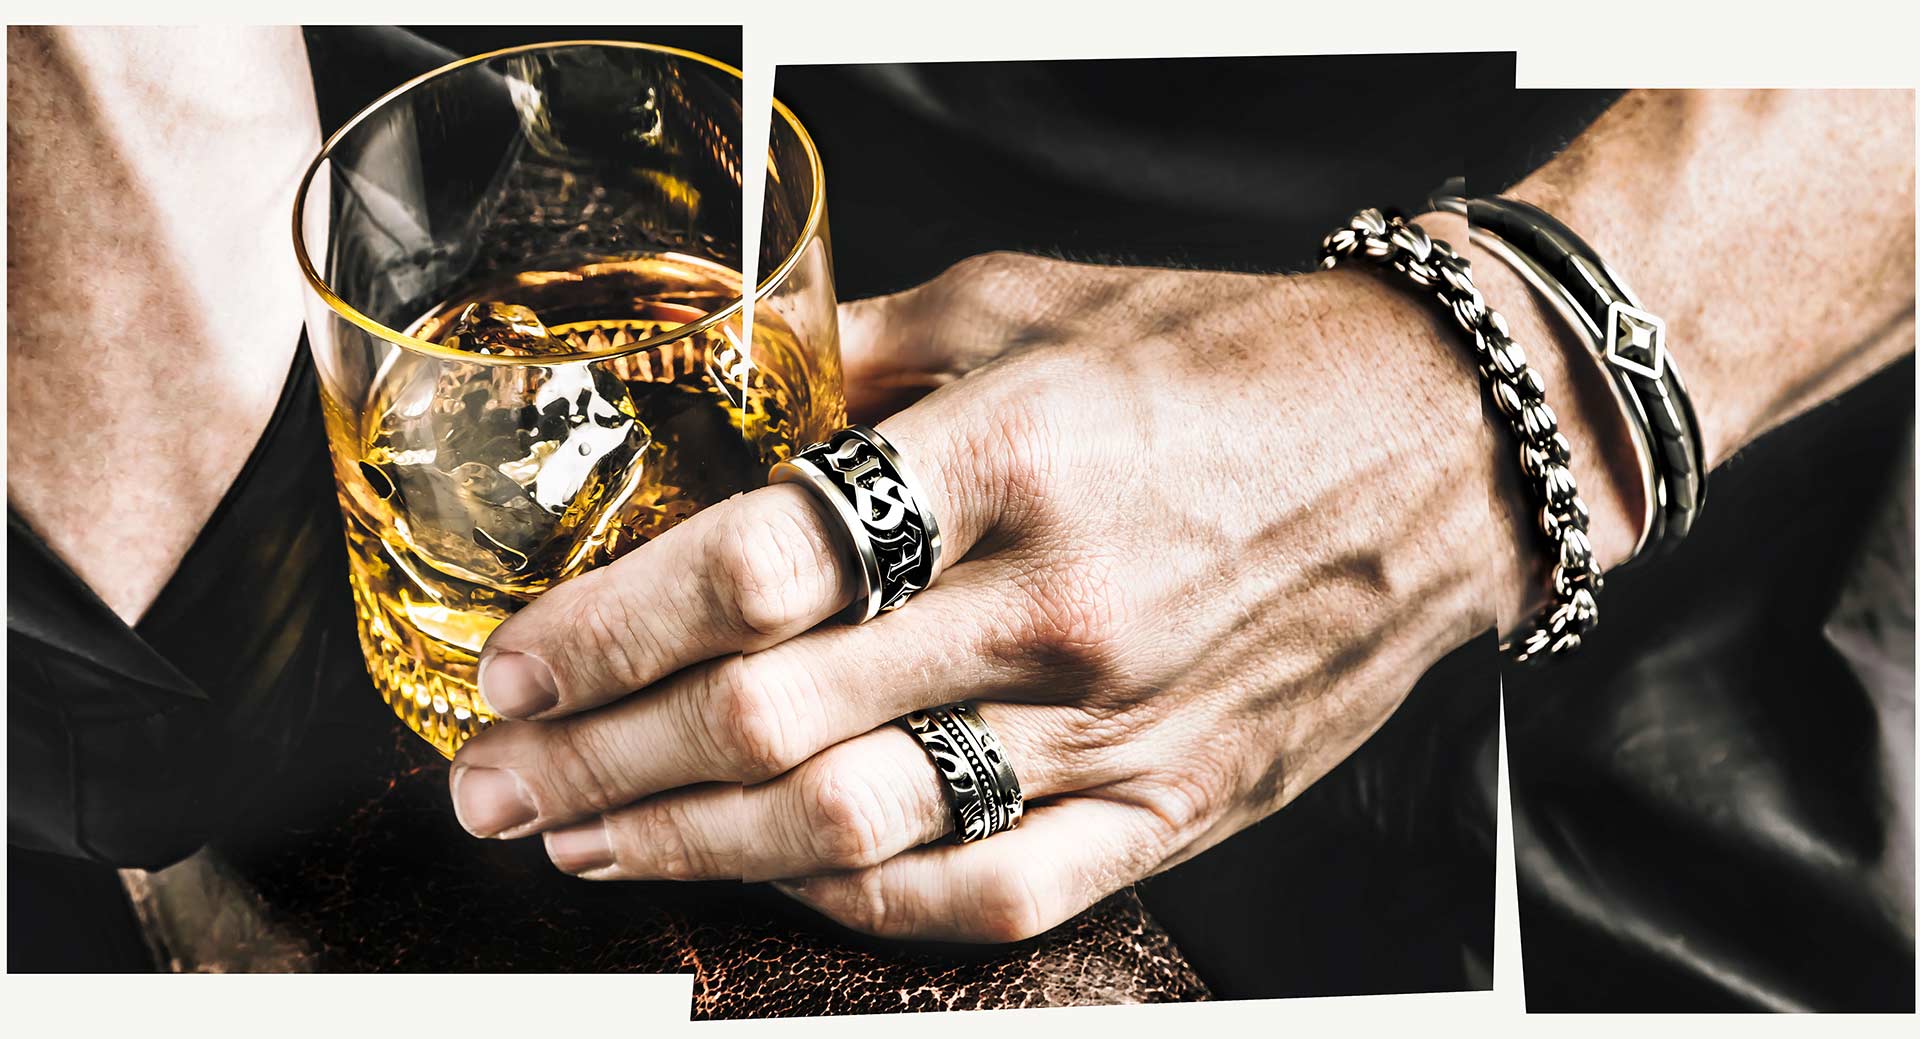 Man holding whiskey drink with rings on fingers